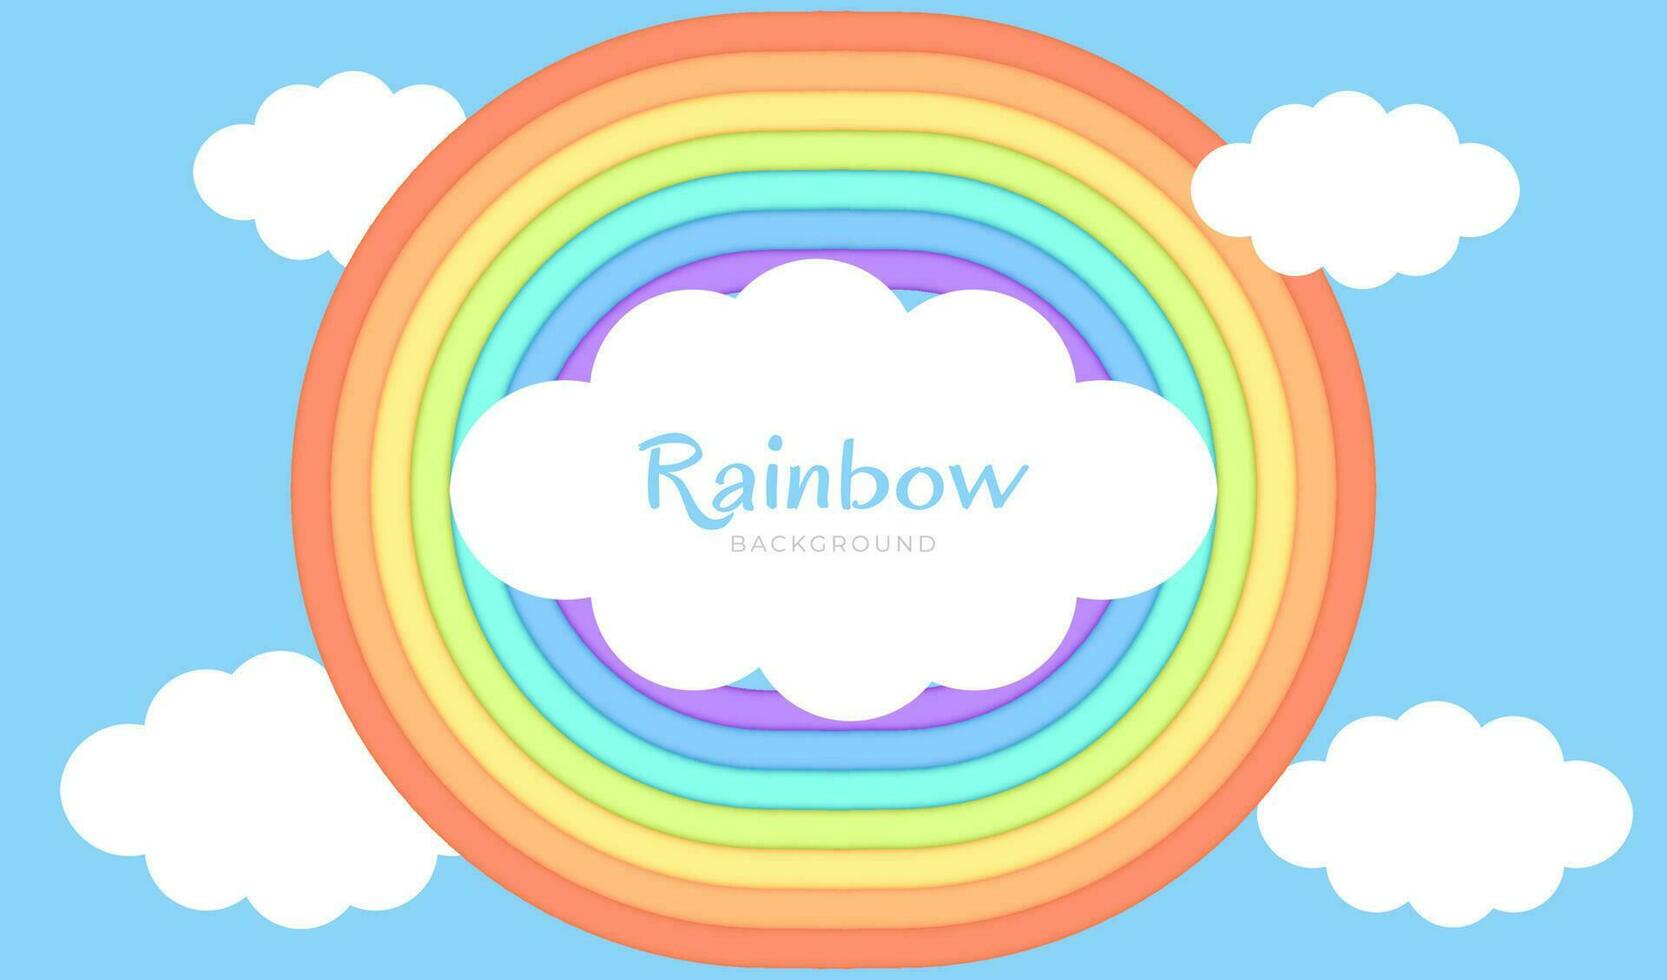 Abstract Blue Sky with Rainbow A vector image with a fun, colorful and happy design 3D clouds and a rainbow. Perfect for use as a background, banner, card for birthdays, parties. Copy space frame